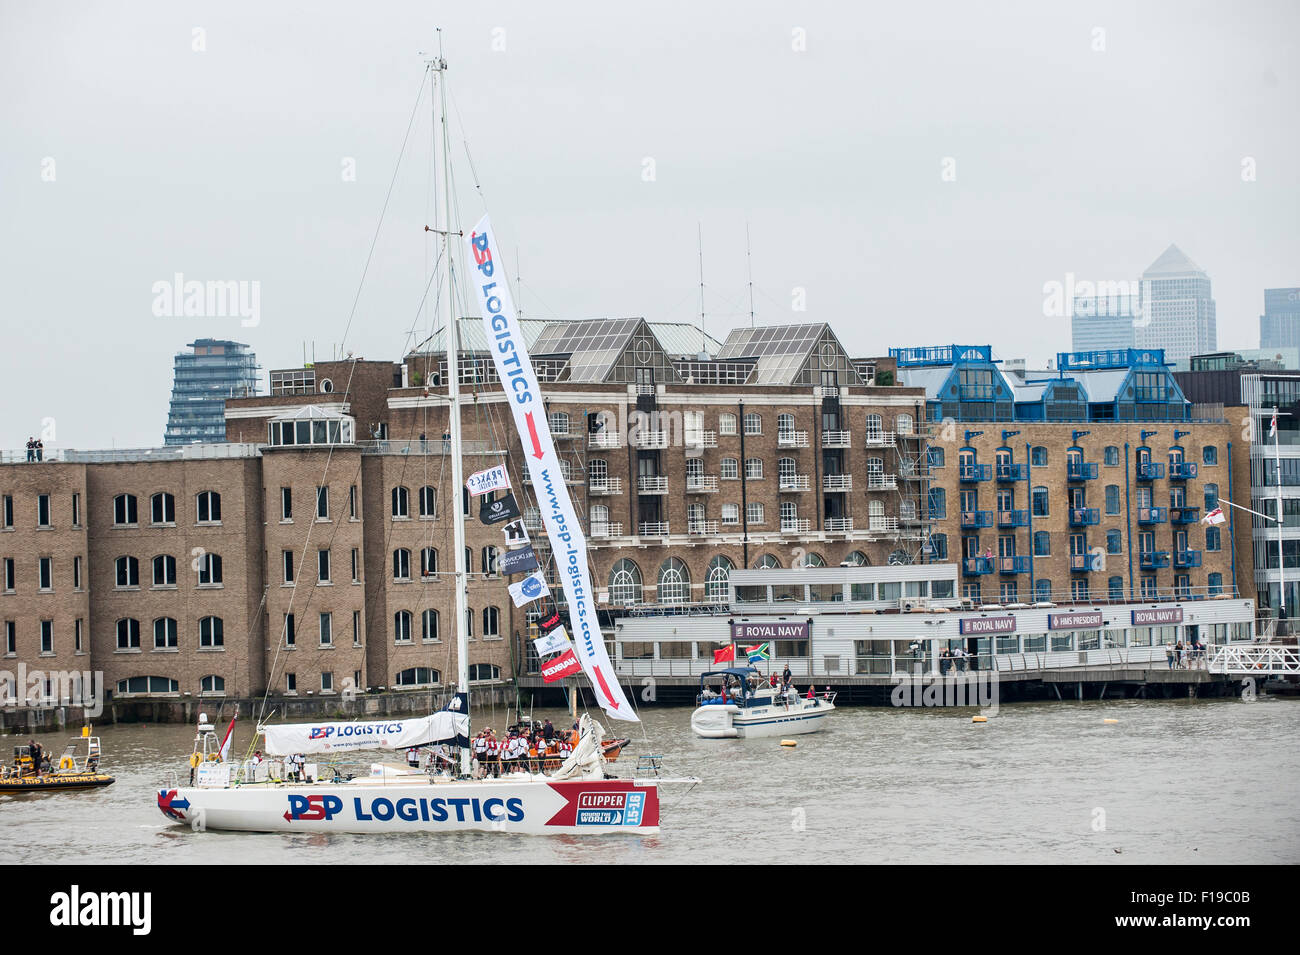 London, UK. 30 August 2015.  DSP Logistics, one of the twelve yachts competing in the Clipper Round the World race, leaves their moorings in St. Katherine's Dock for their journey down the River Thames for the start of their 40,000 mile, 11 month race.  Each yacht comprises a crew of 22 - professional skipper and the remainder amateurs, many of whom had never sailed before taking up the challenge. Credit:  Stephen Chung / Alamy Live News Stock Photo